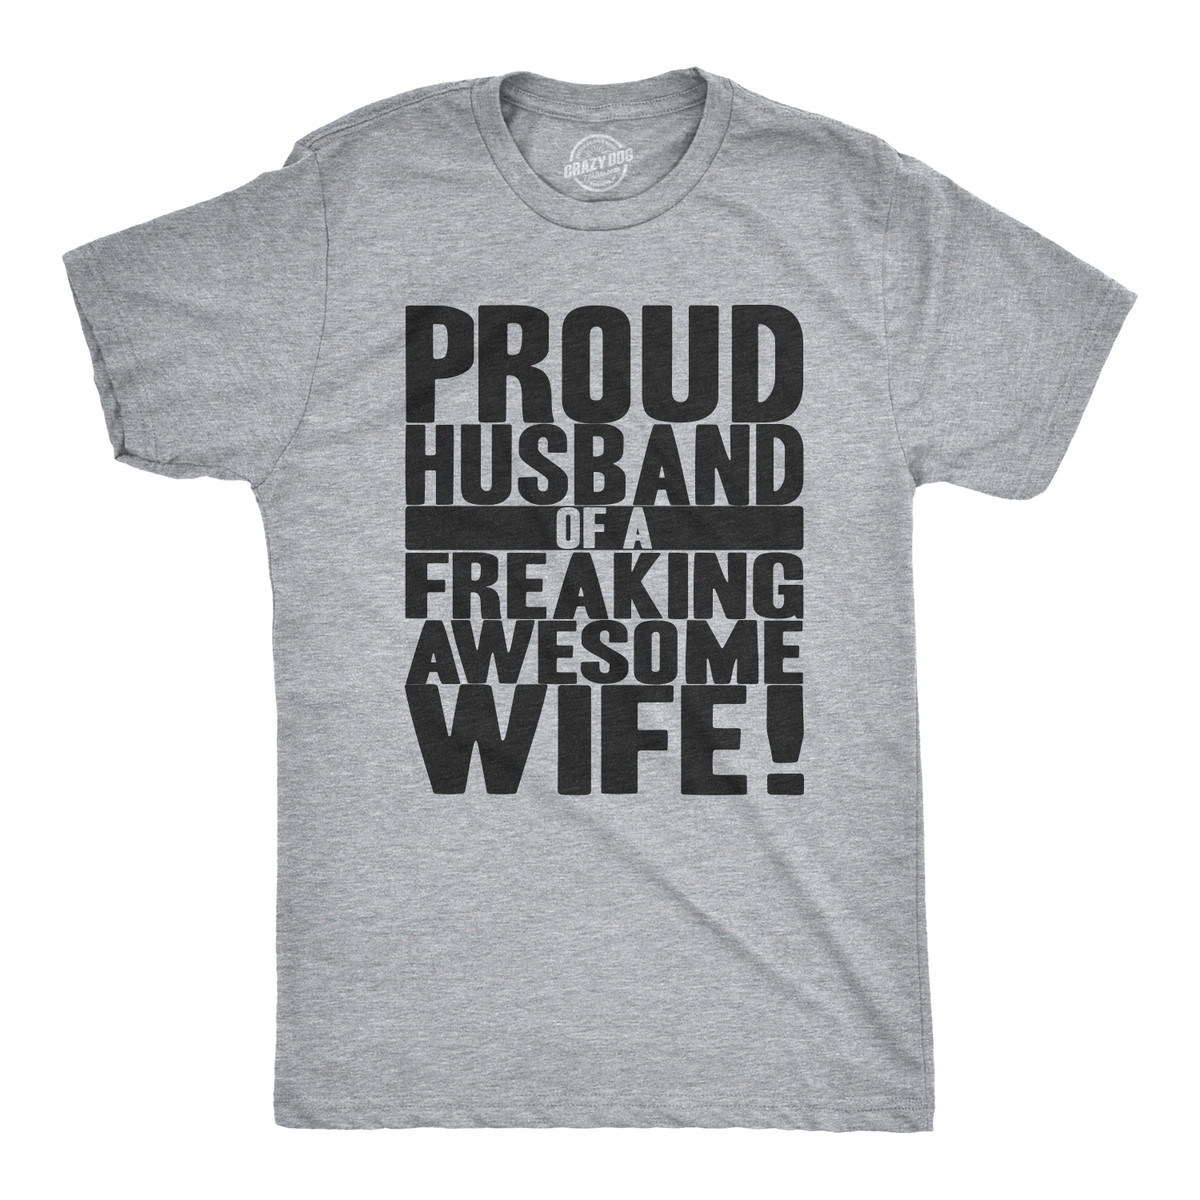 Funny Light Heather Grey Proud Husband of a Freaking Awesome Wife Mens T Shirt Nerdy Valentine&#39;s Day wedding Tee